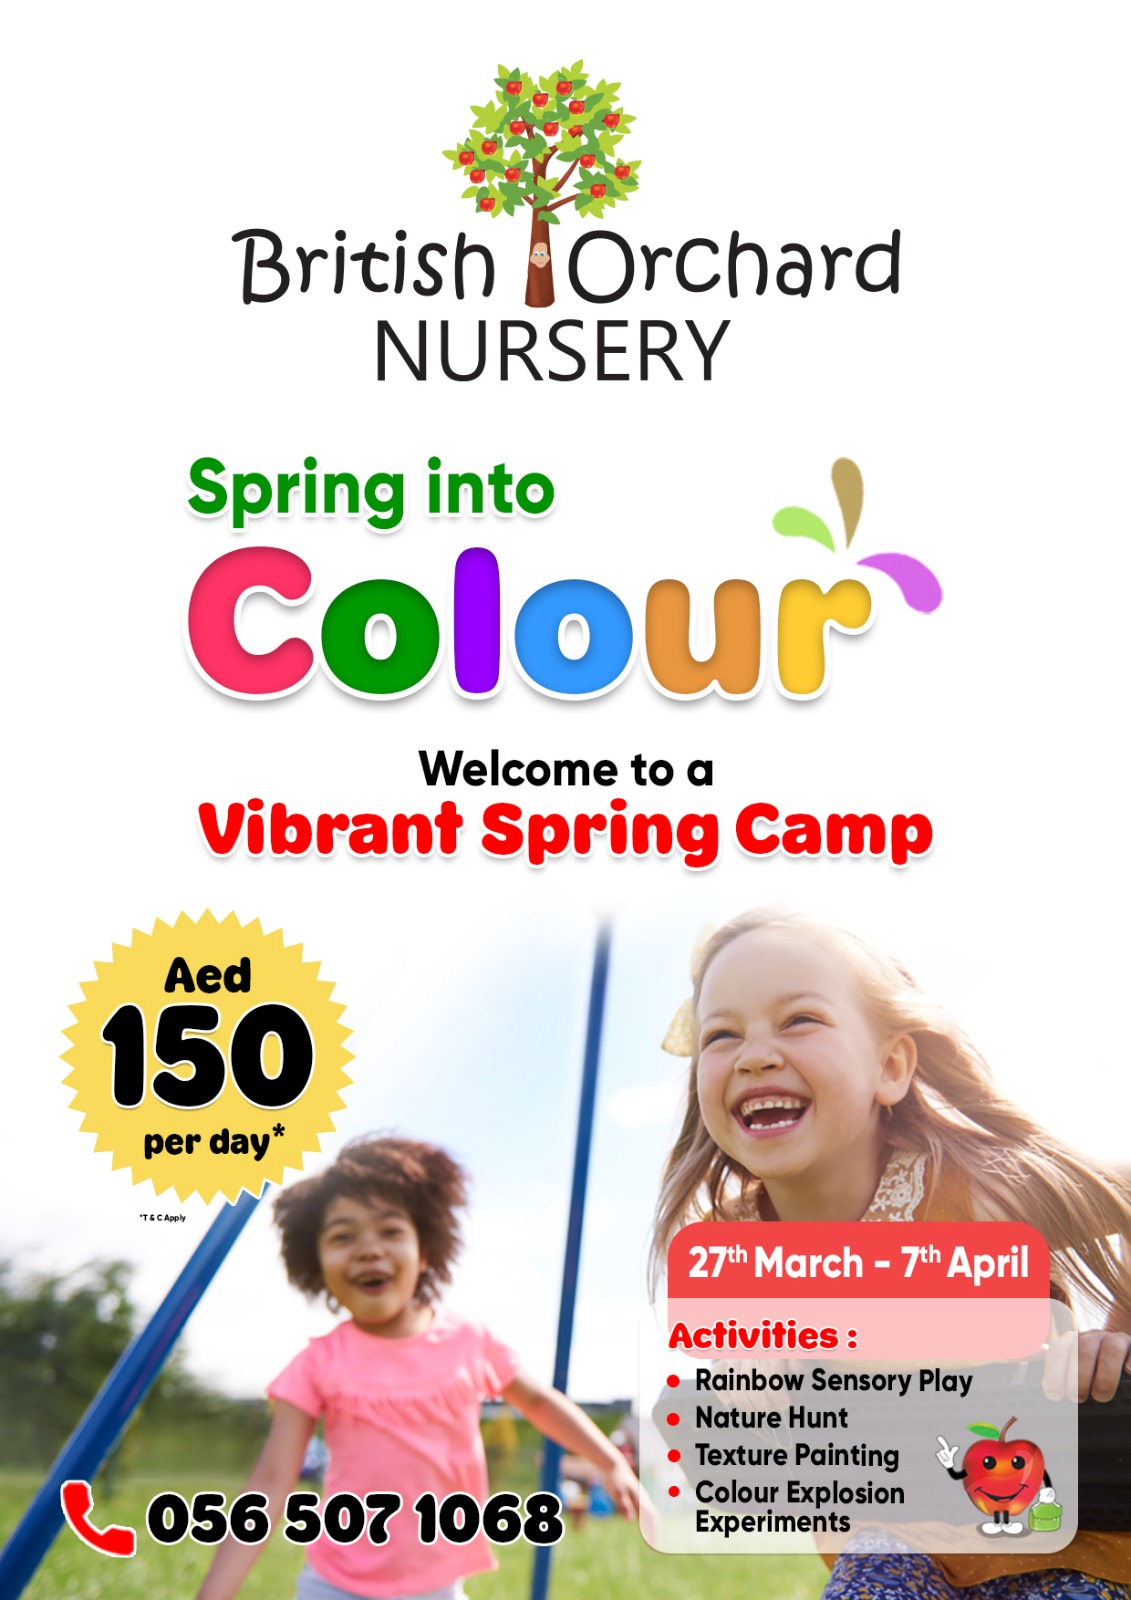 Our Spring camp is in full bloom with a Pop of Colour!